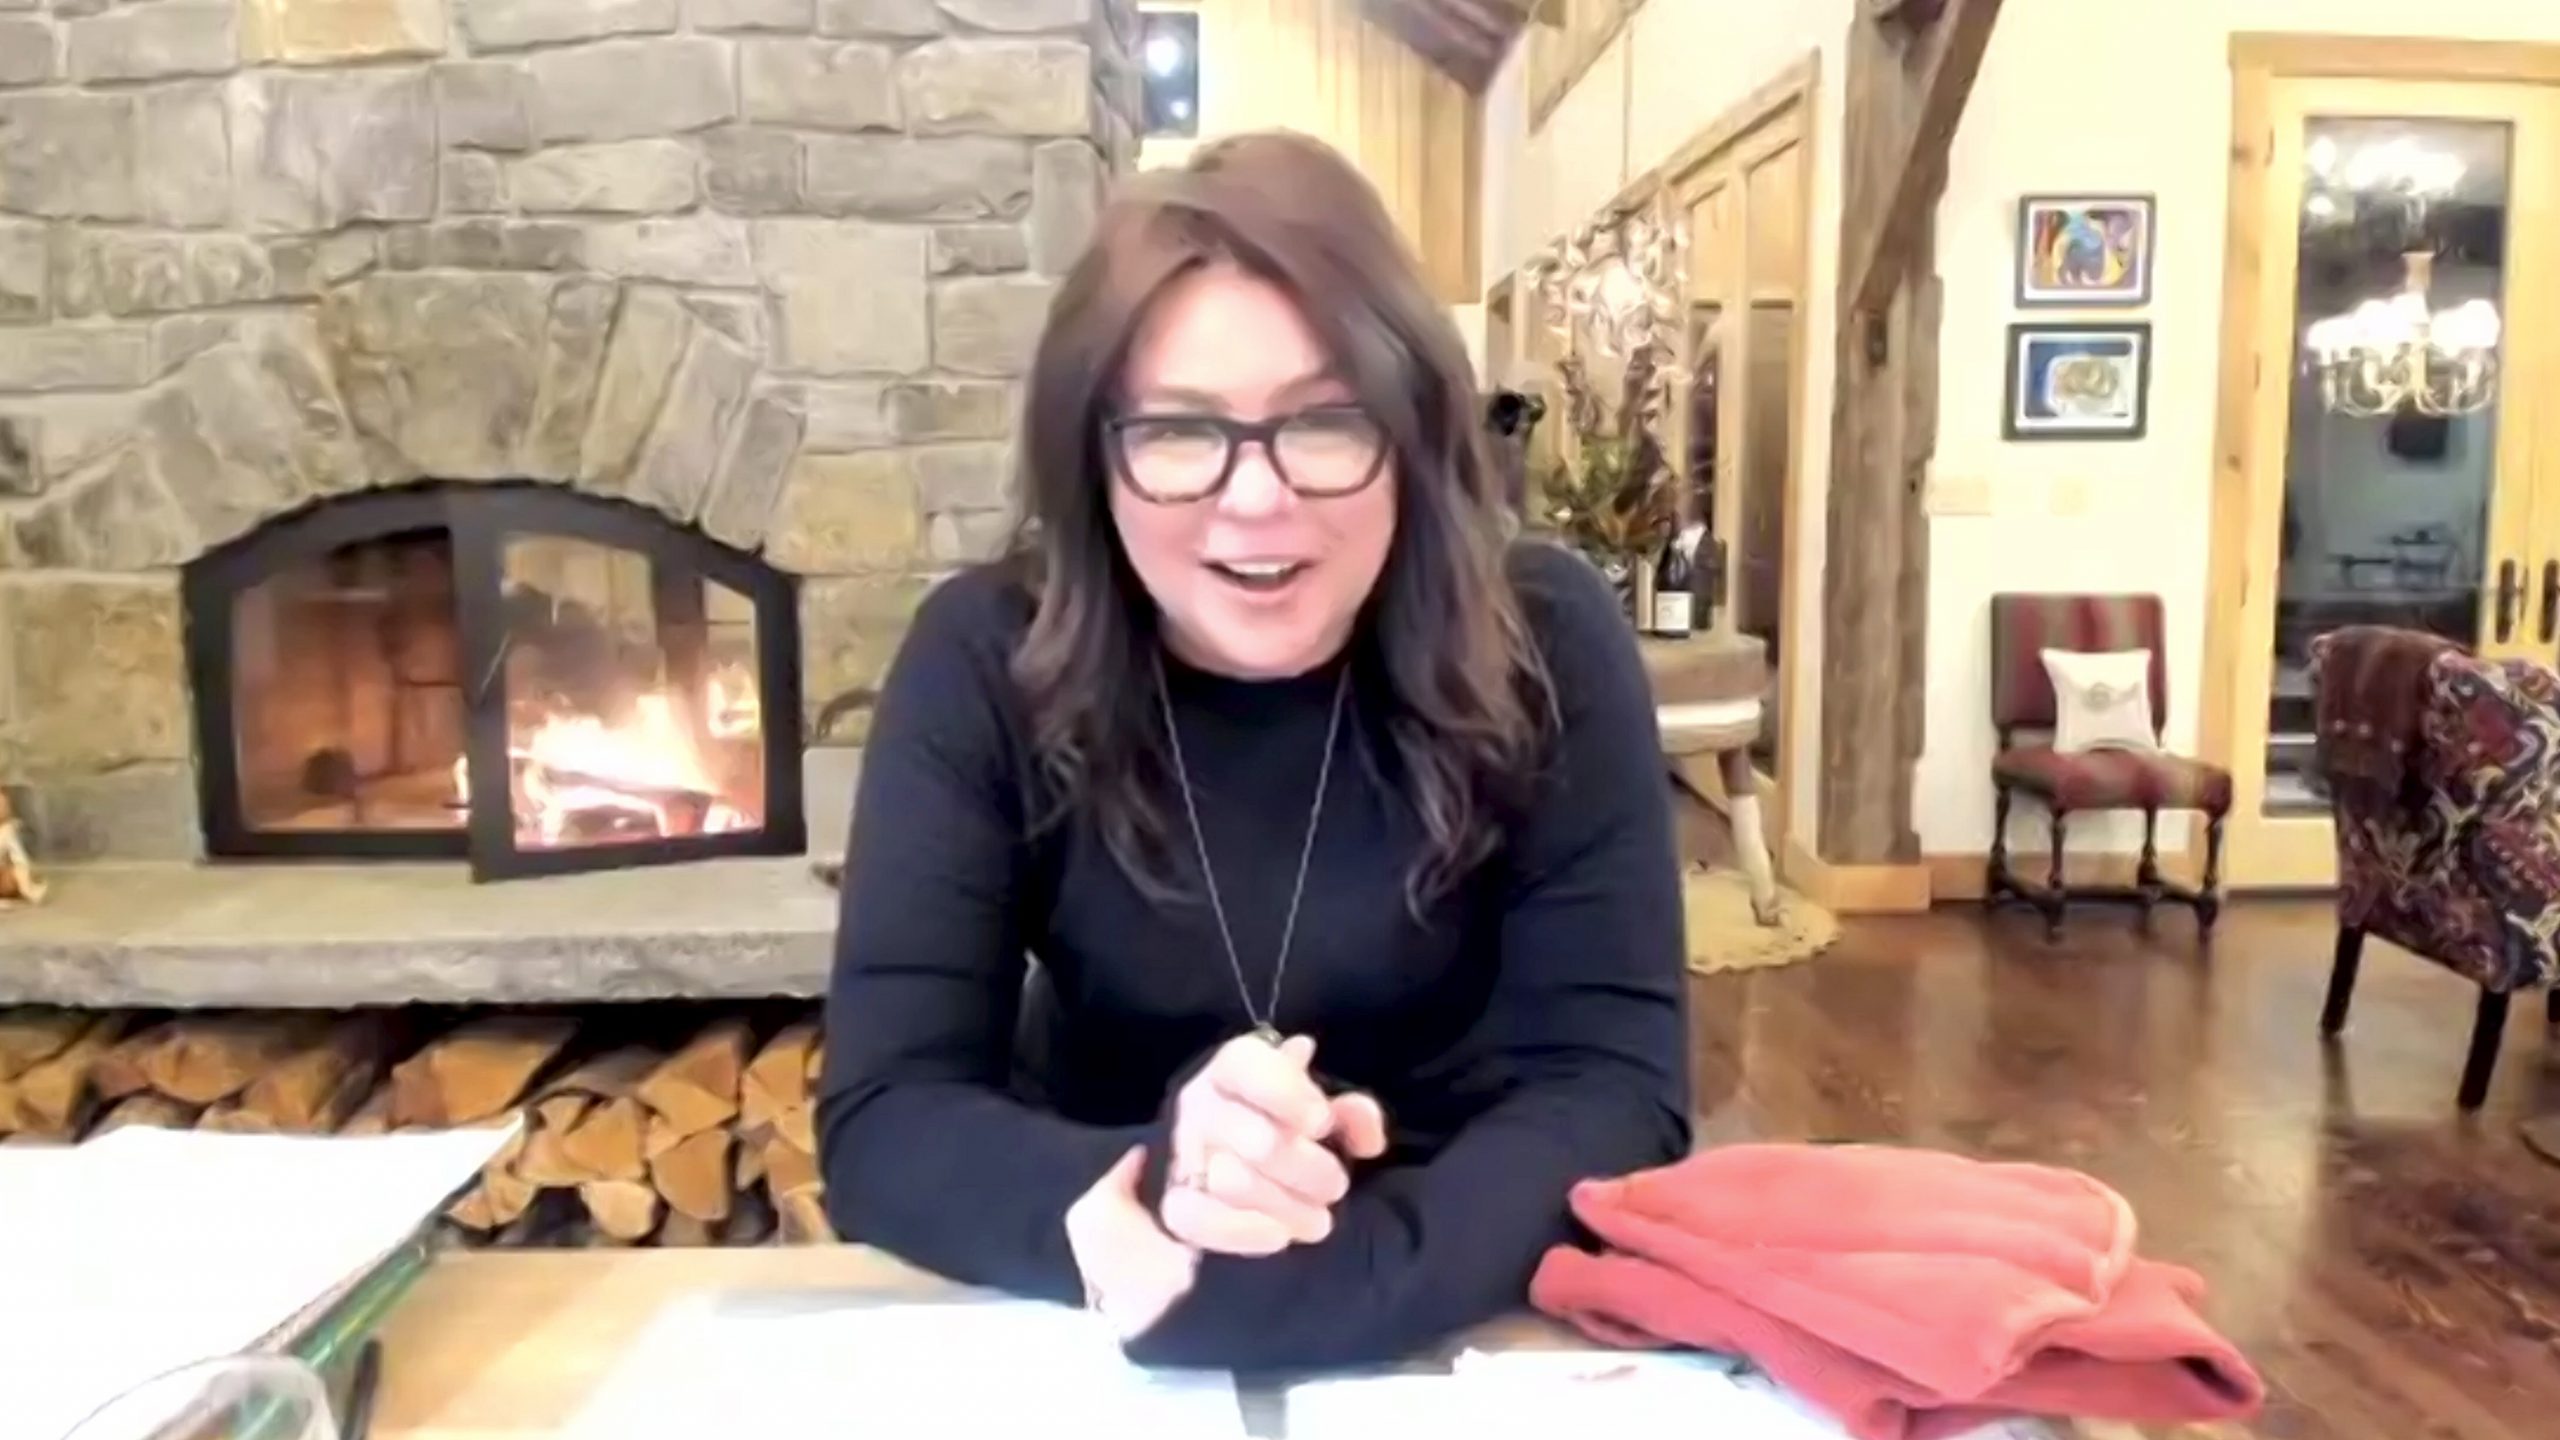 Celebrity chef Rachael Ray wears a long-sleeved black blouse in this photograph.